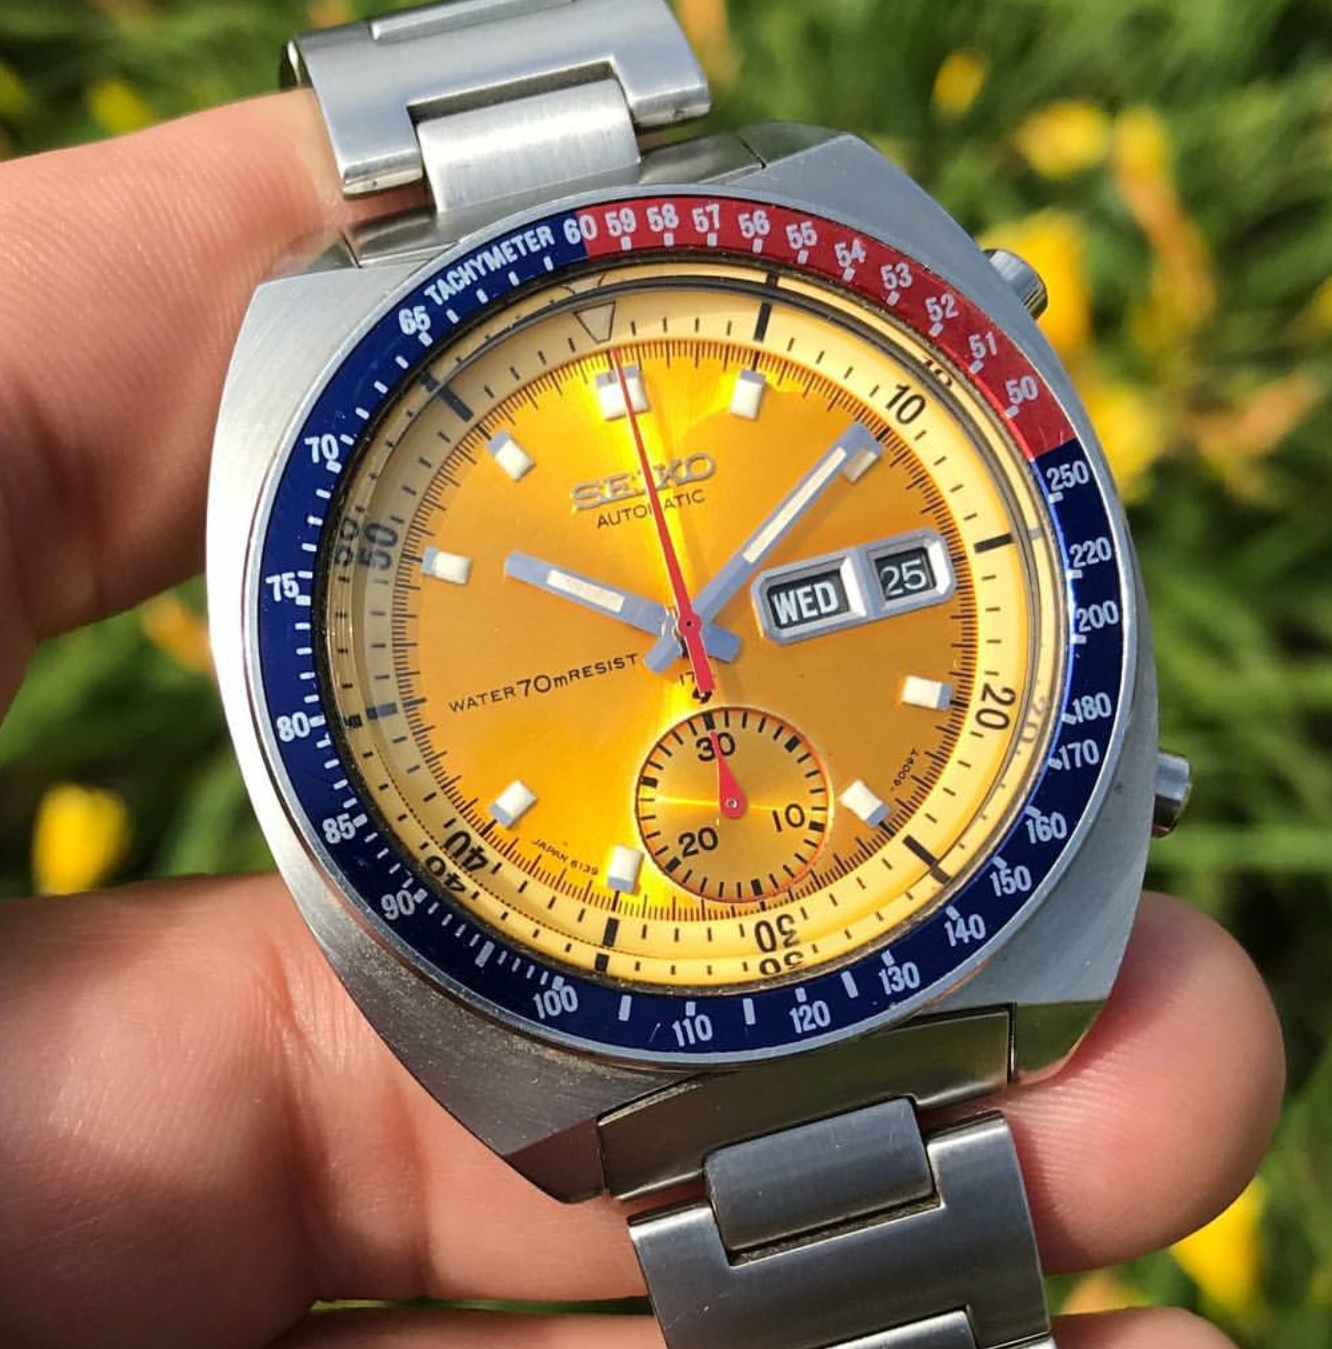 Seiko True Pogue has the right stuff to BLAST off | Omega Forums